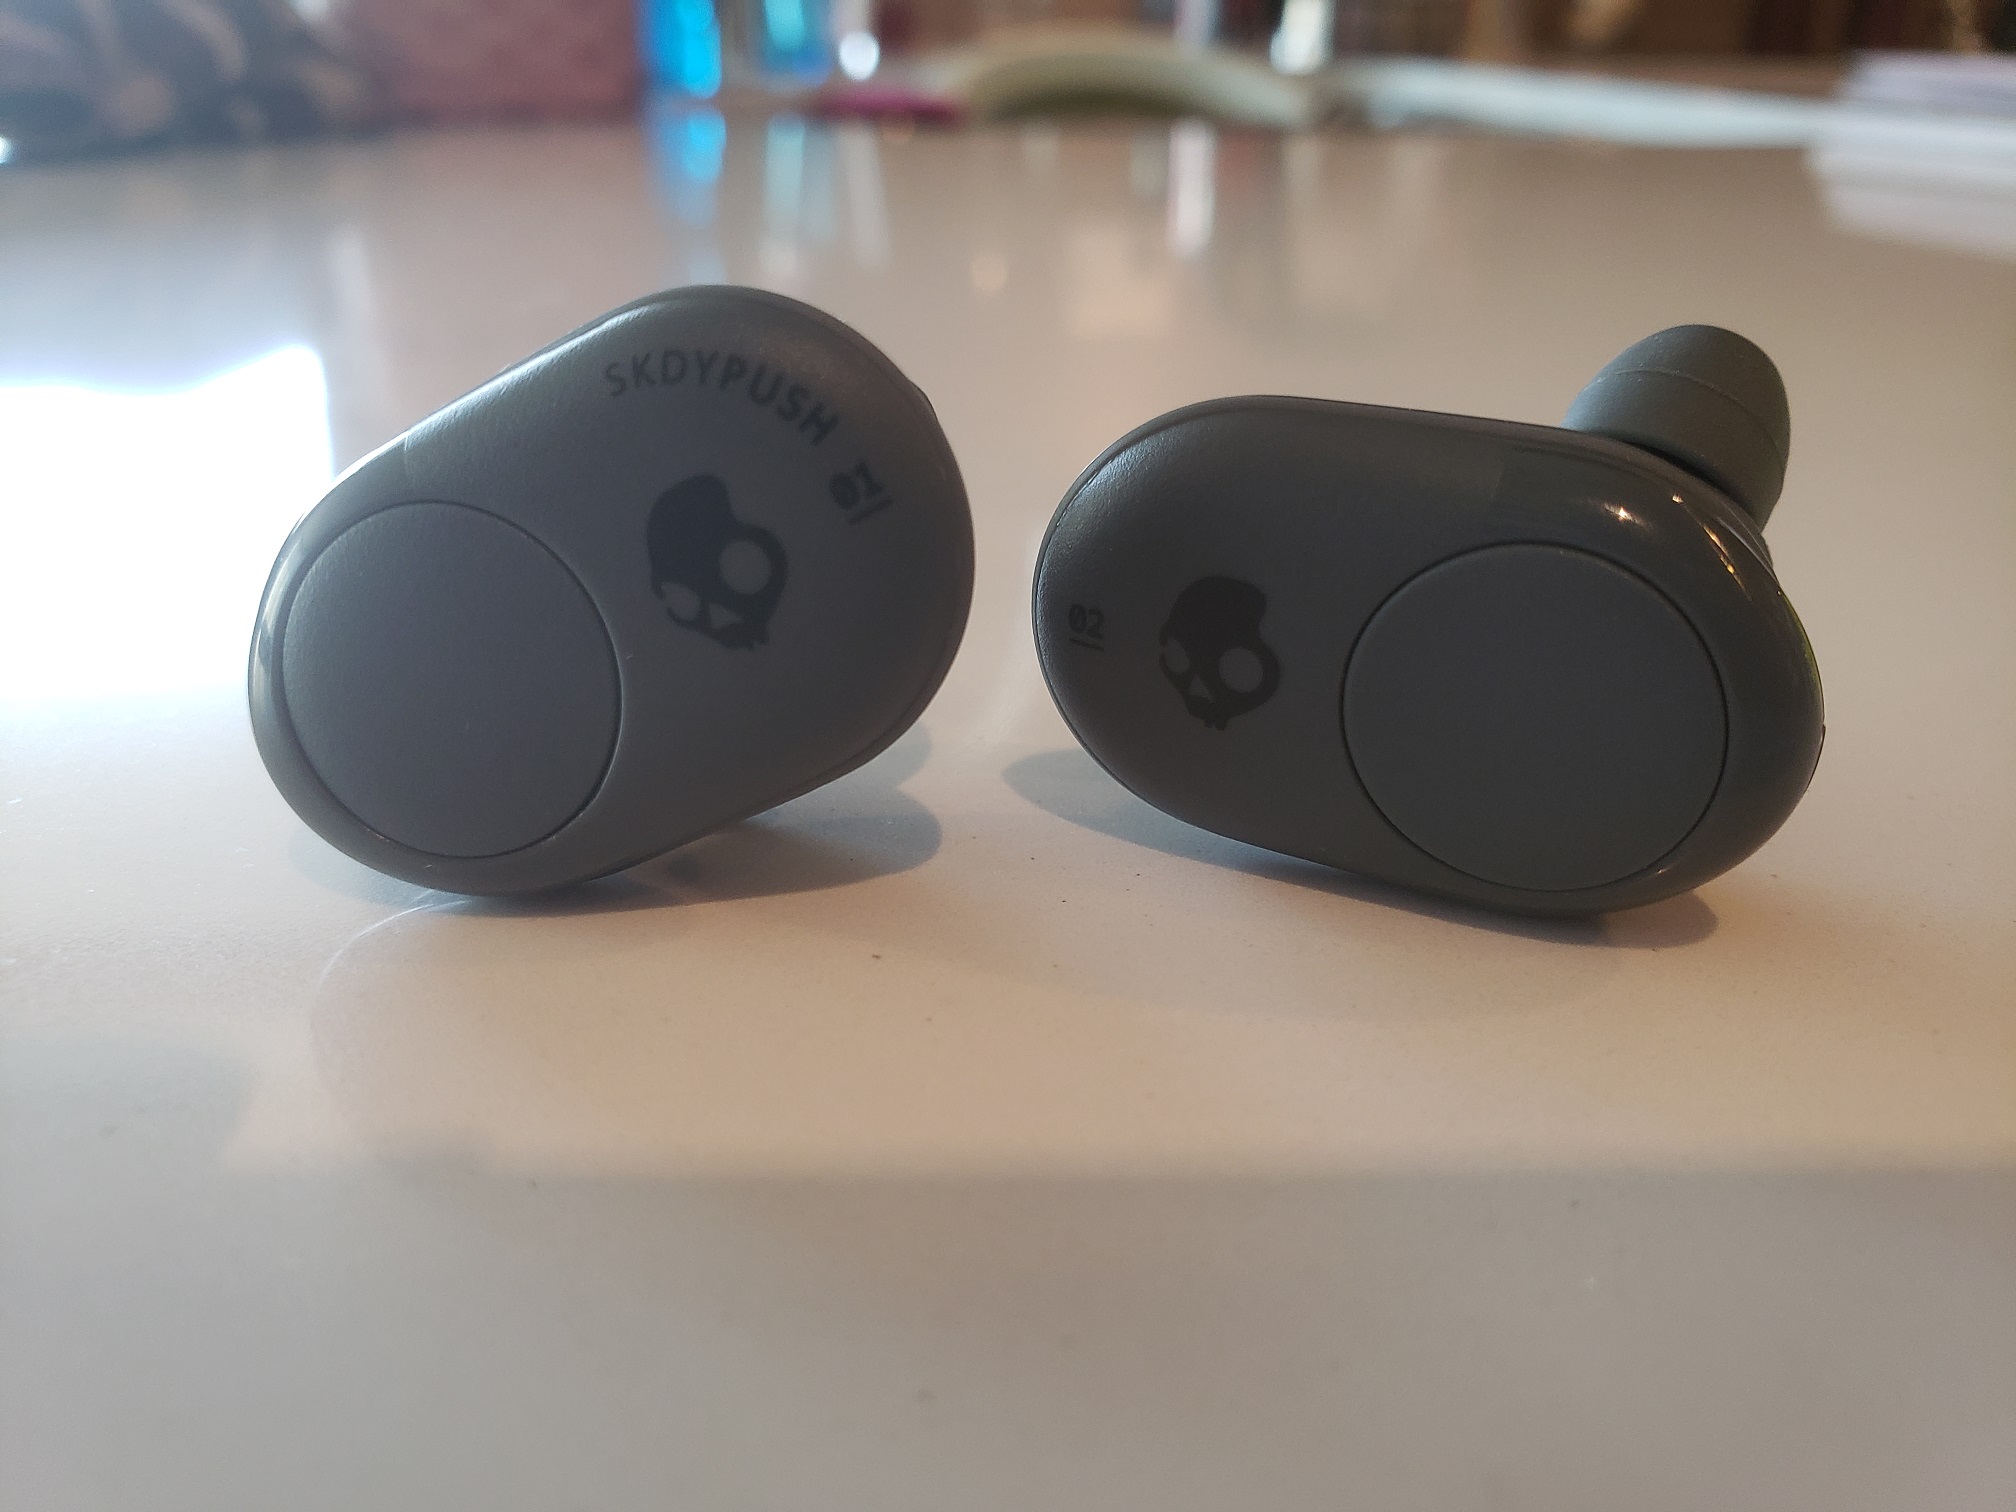 image of the Skullcandy Push earbuds on a table